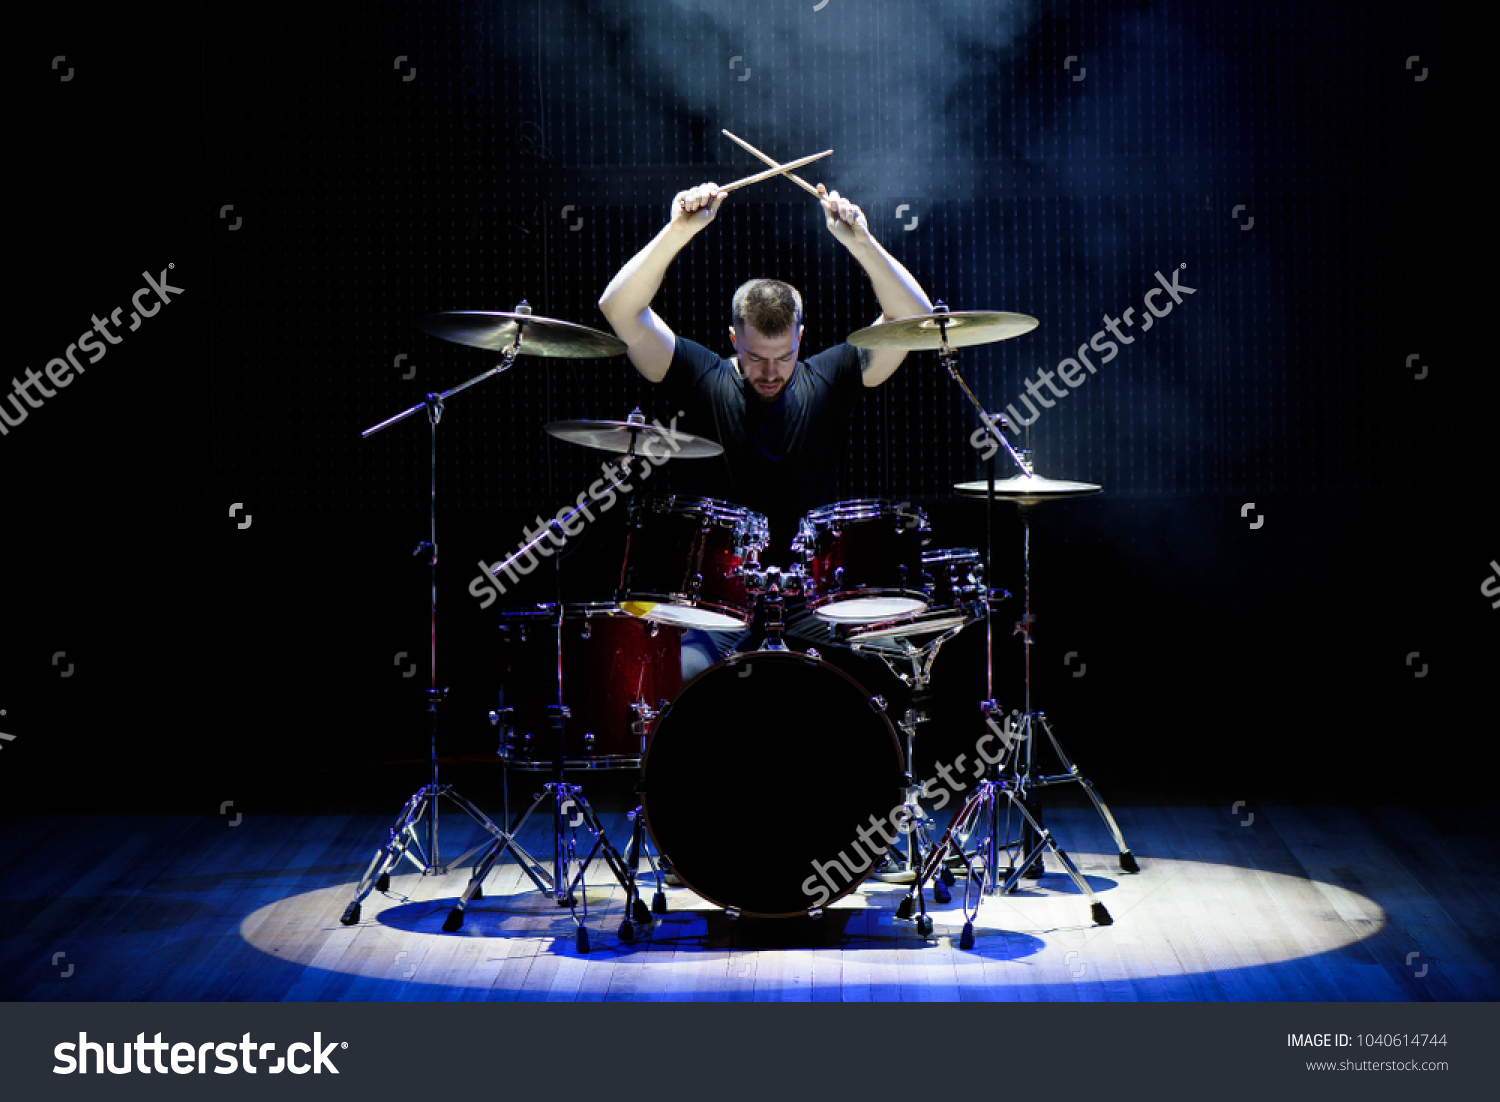 Drummer playing the drums with smoke and powder in the background #1040614744